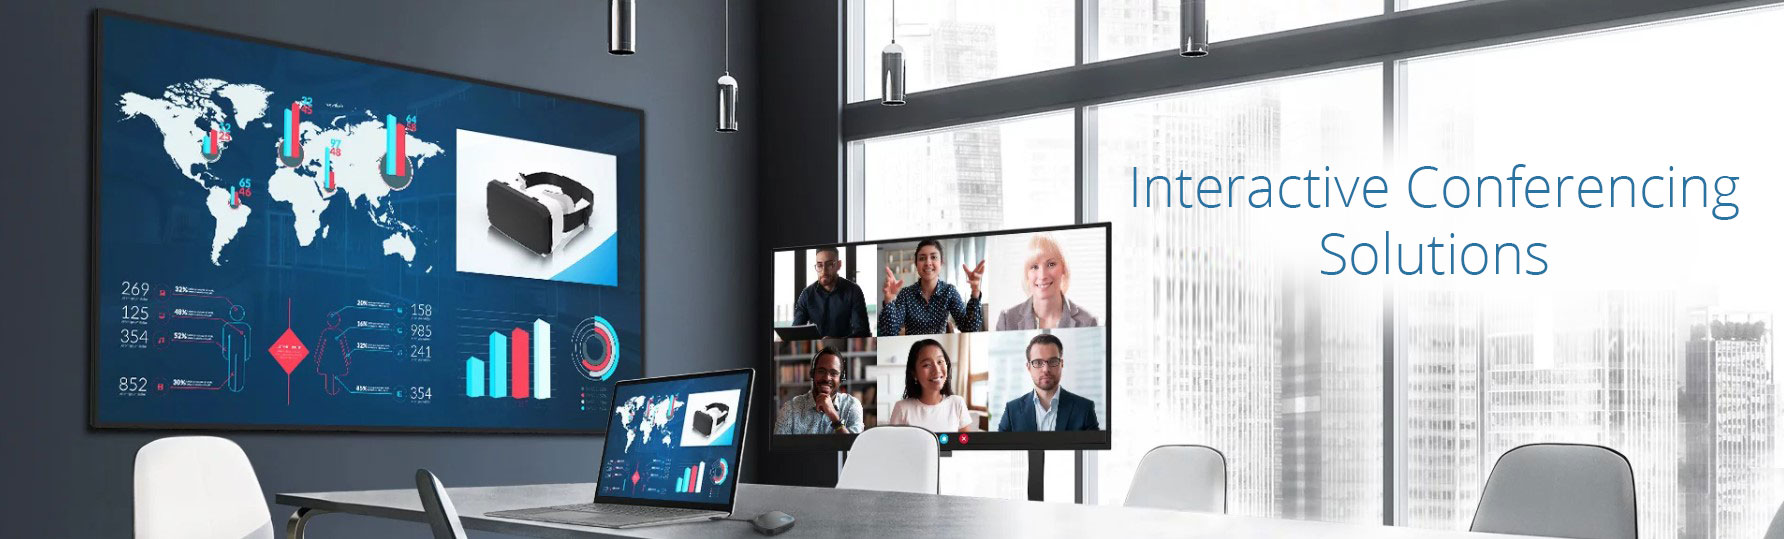 Advanced video conferencing tools including cameras, microphones, and software - Mitronics